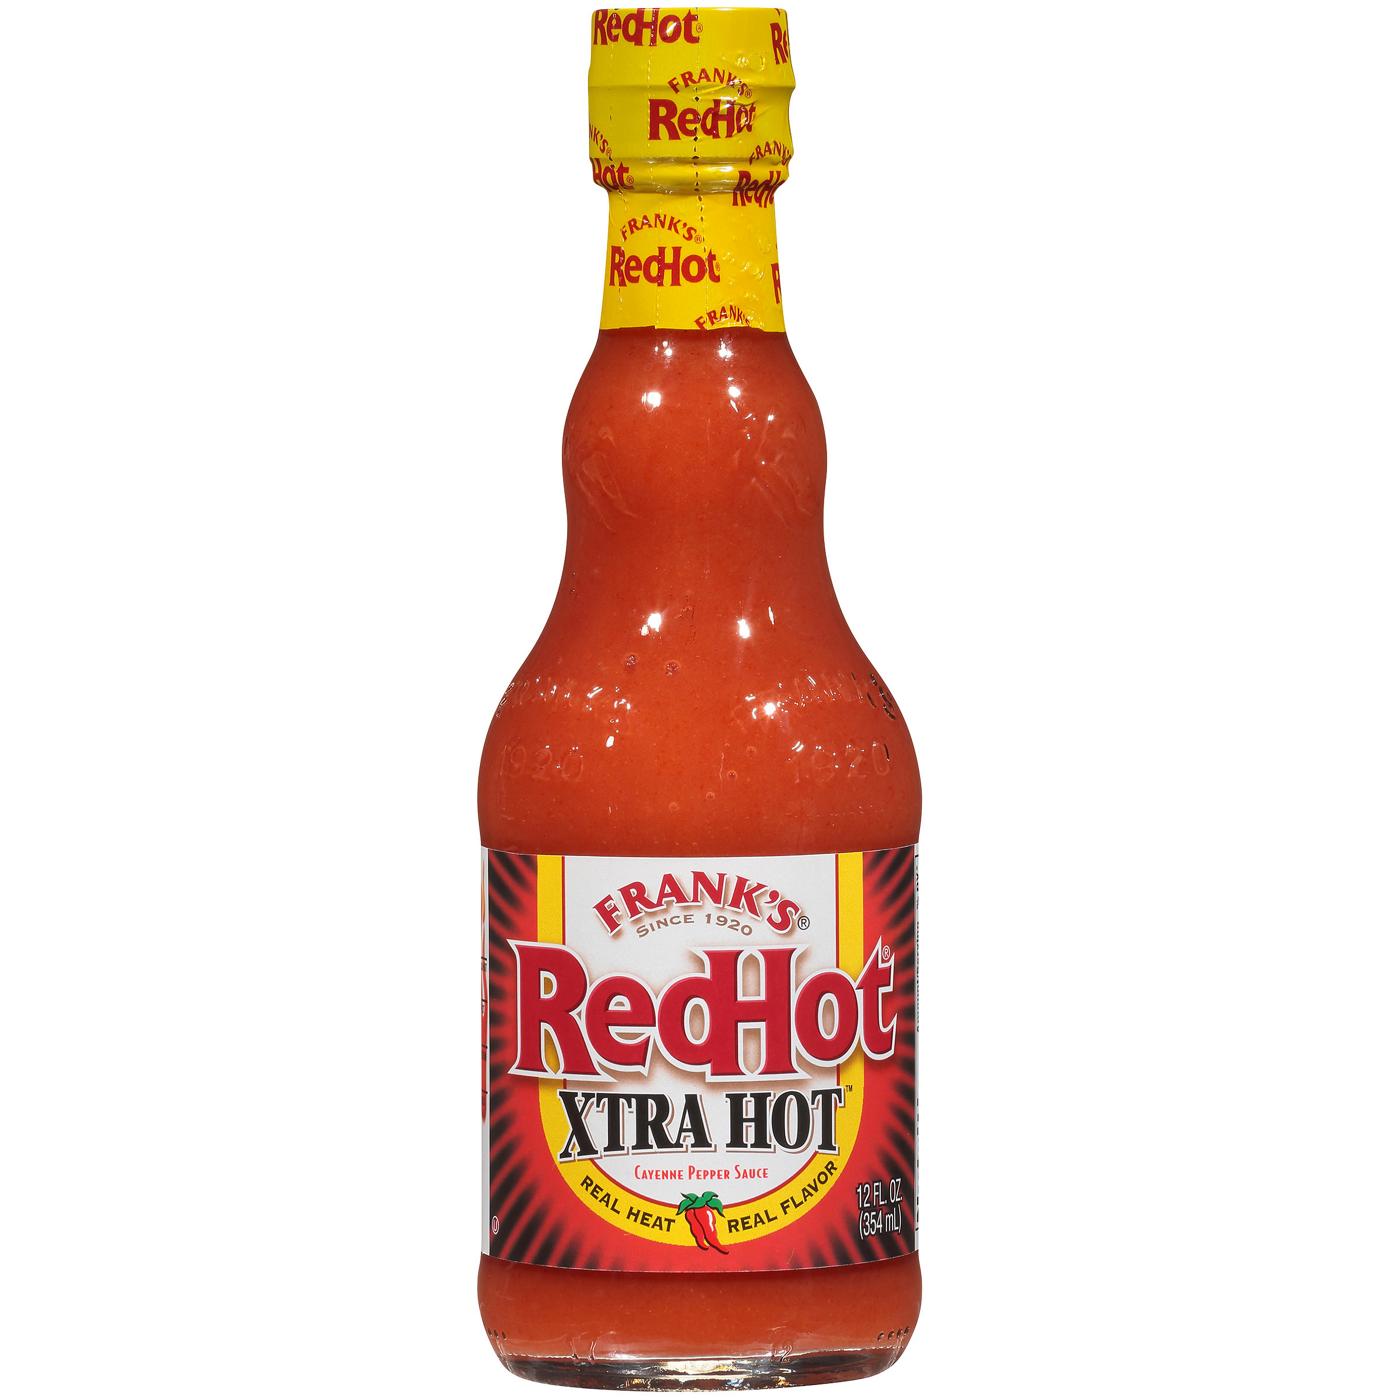 Frank's RedHot Xtra Hot Sauce; image 1 of 2